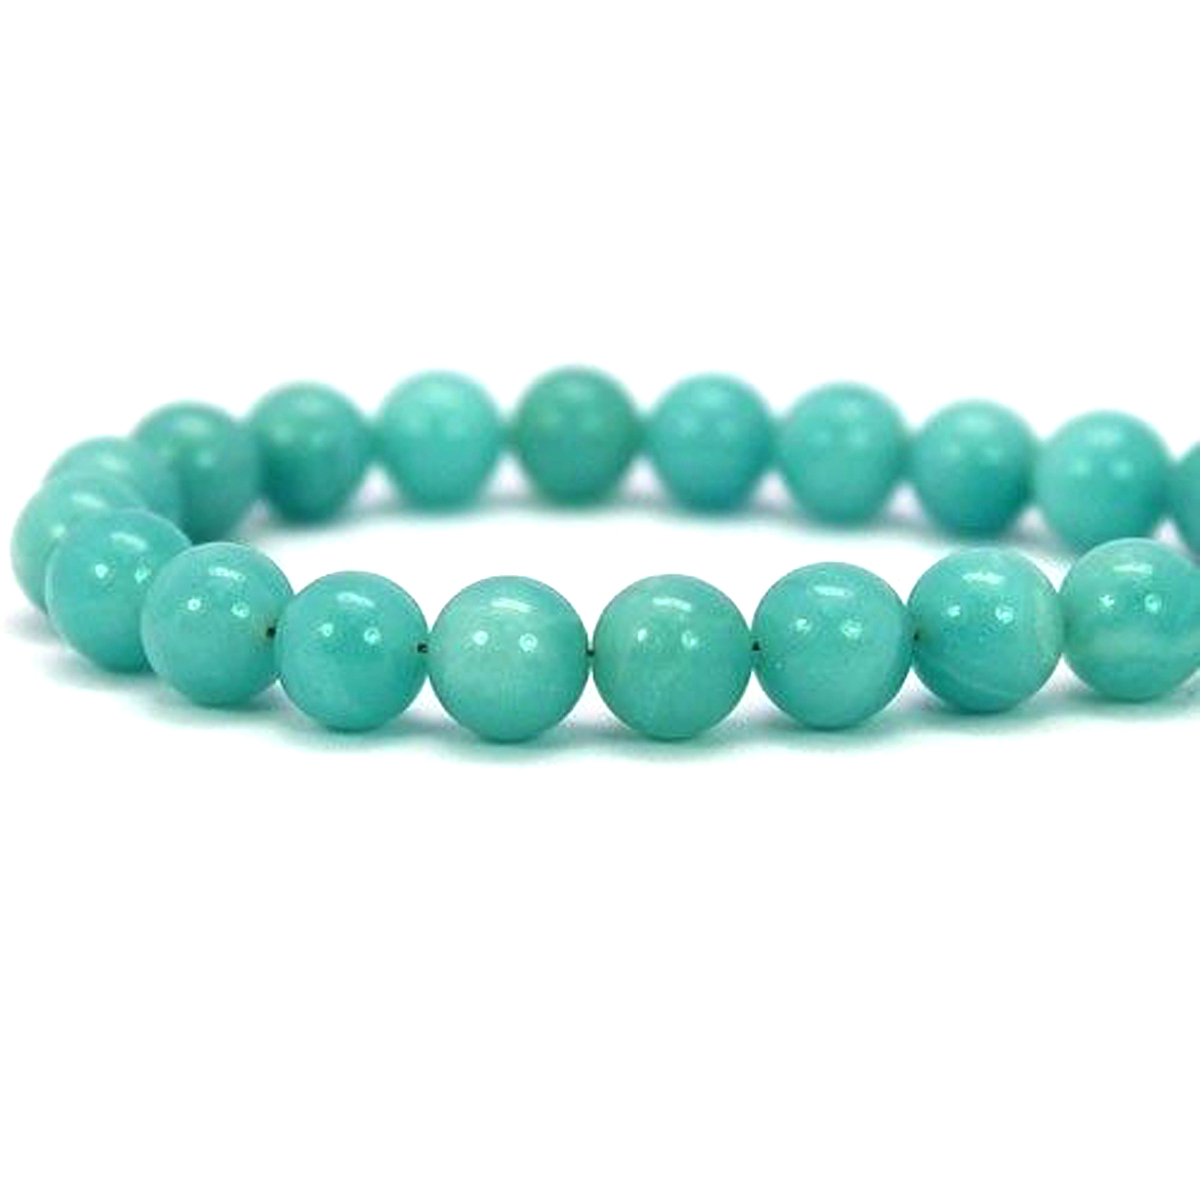 Amazonite AAA Quality Beads String - 14 Inch